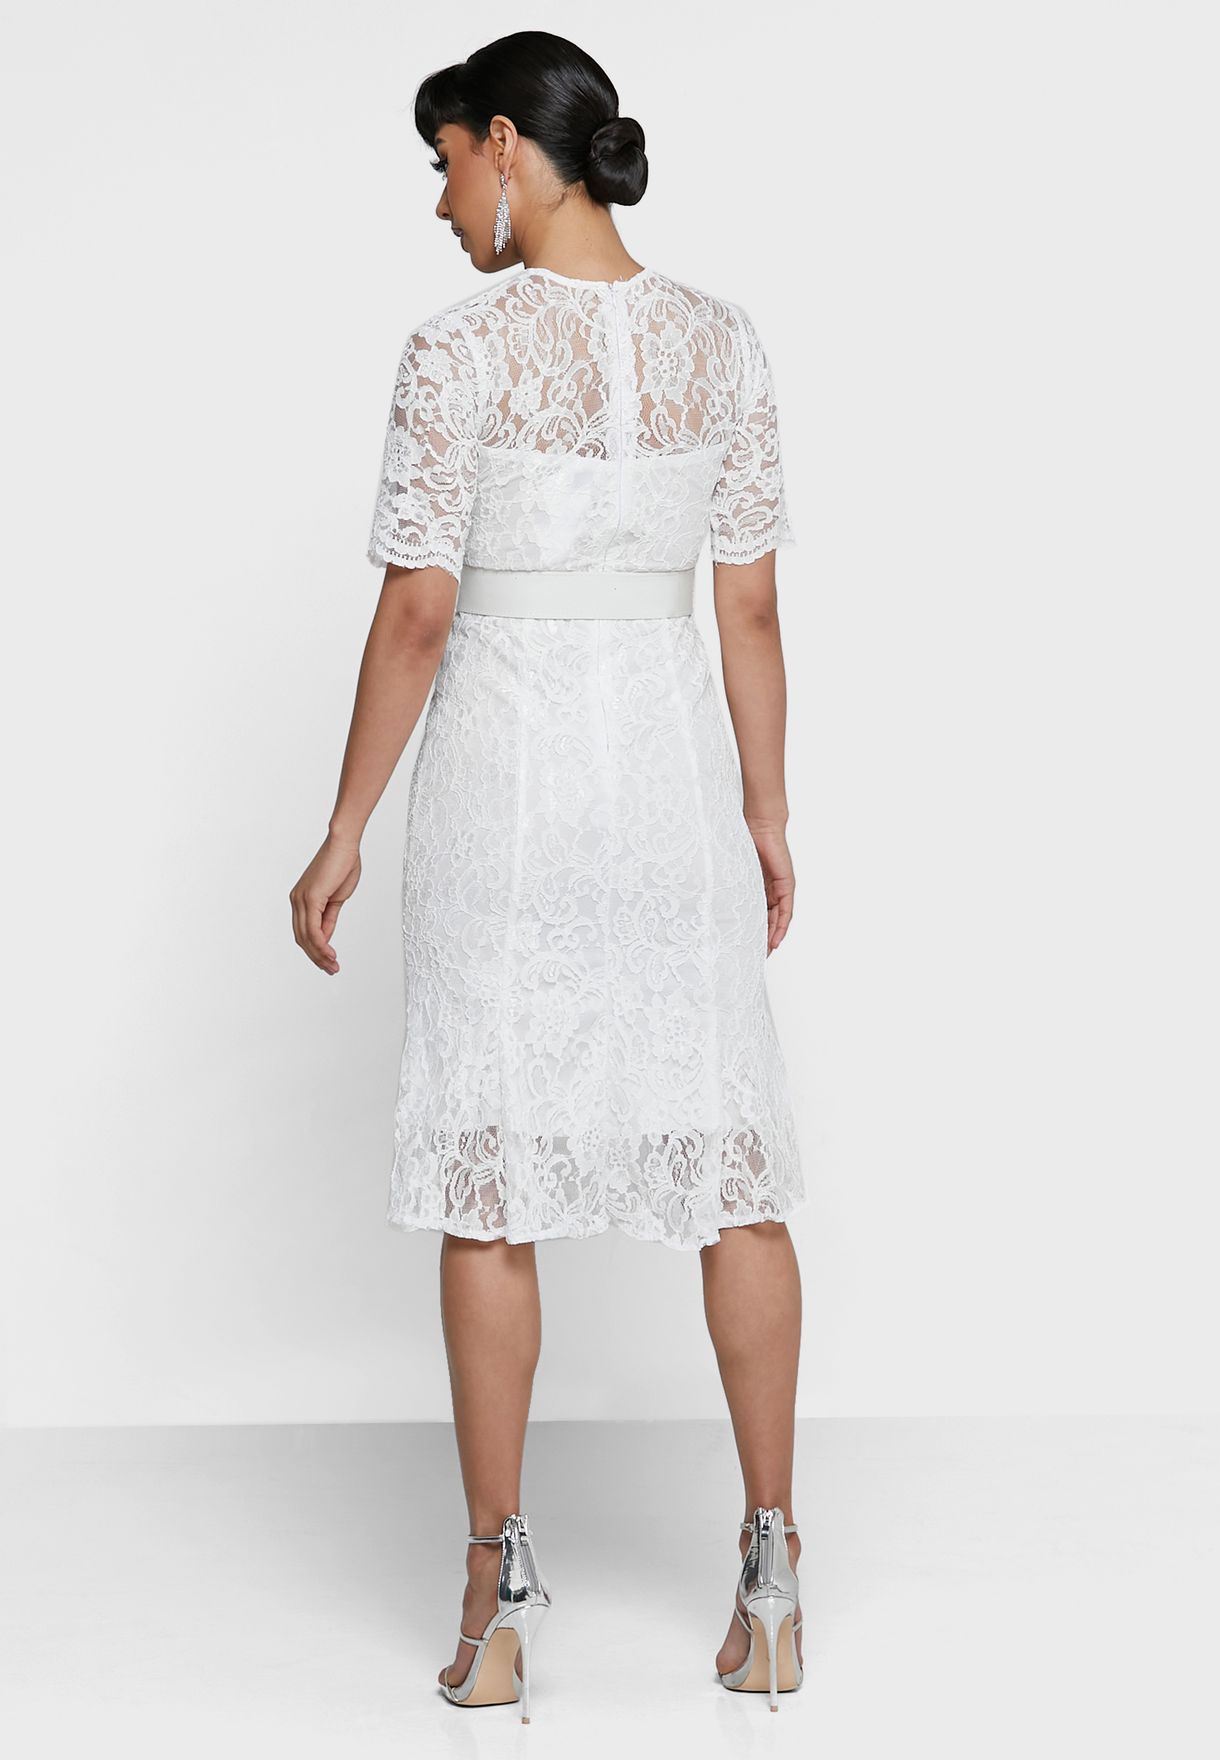 Laced Sweetheart Neck Dress